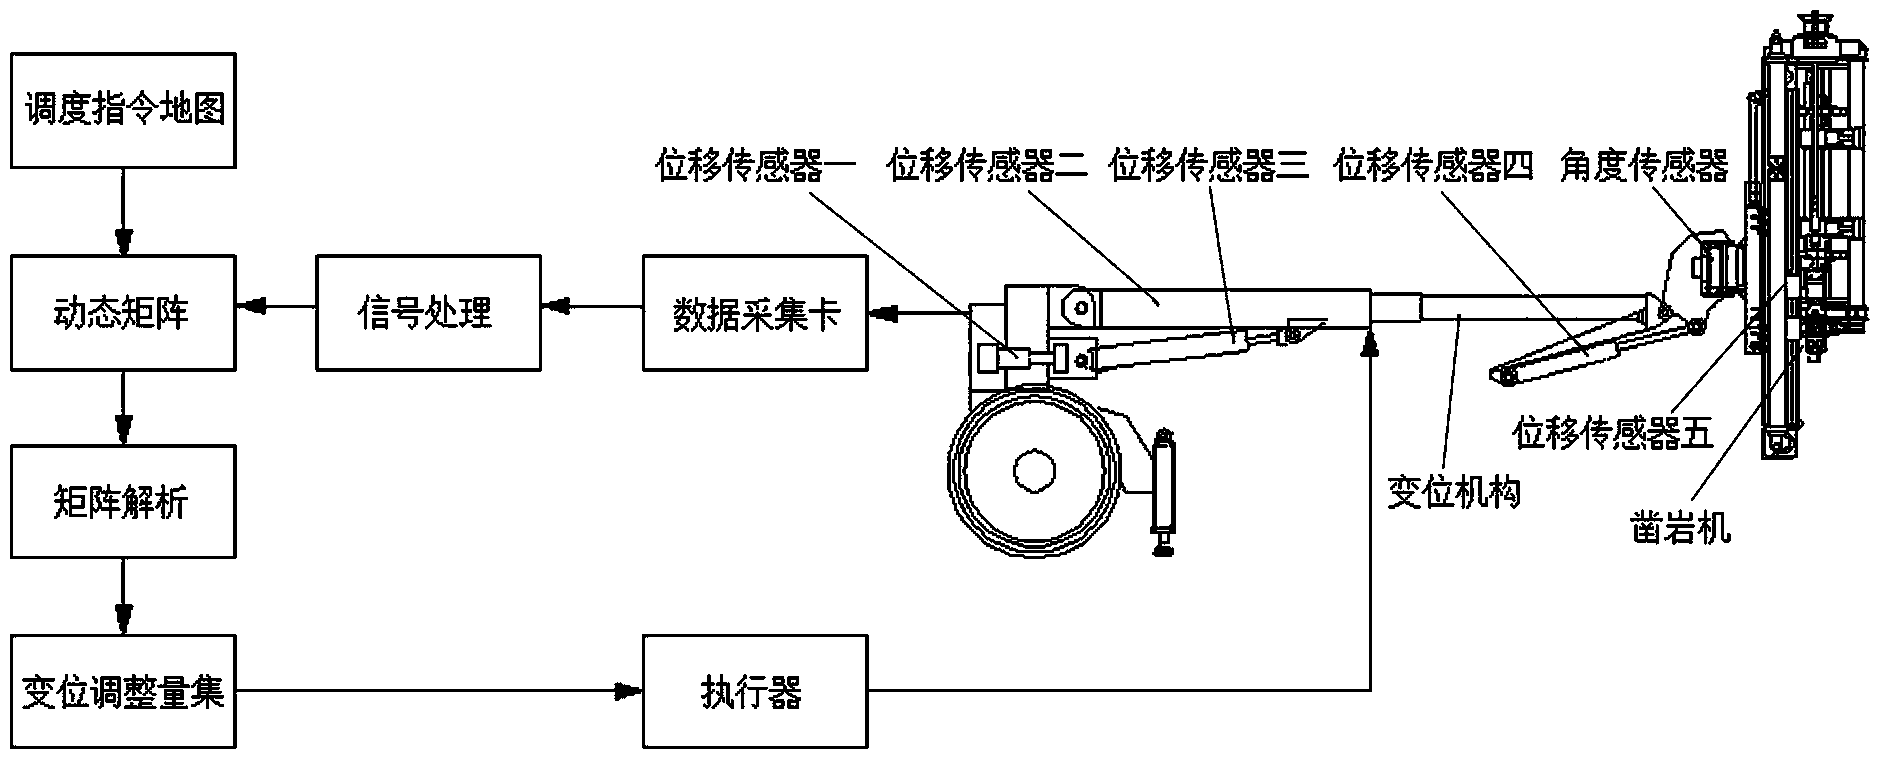 Automatic positioning system of underground mining drill carriage